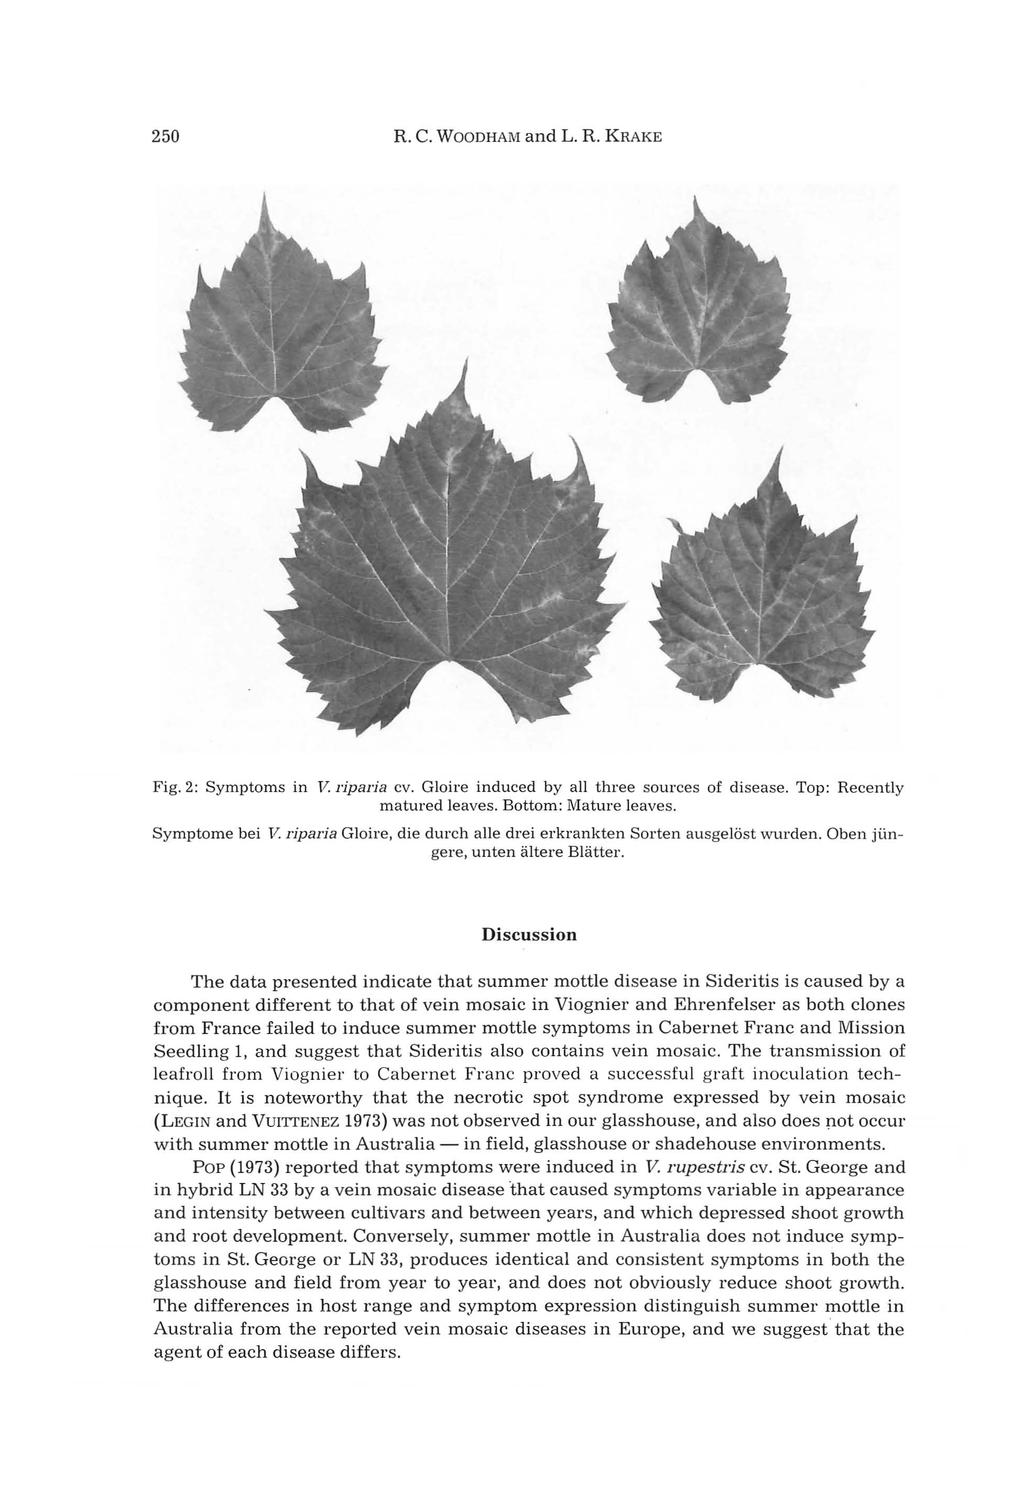 25 R. c. WOODHAM and L. R. KRAKE Fig. 2: Symptoms in V. riparia cv. Gloire induced by all three sources of disease. Top: Recently matured leaves. Bottom: Mature leaves. Symptome bei V.